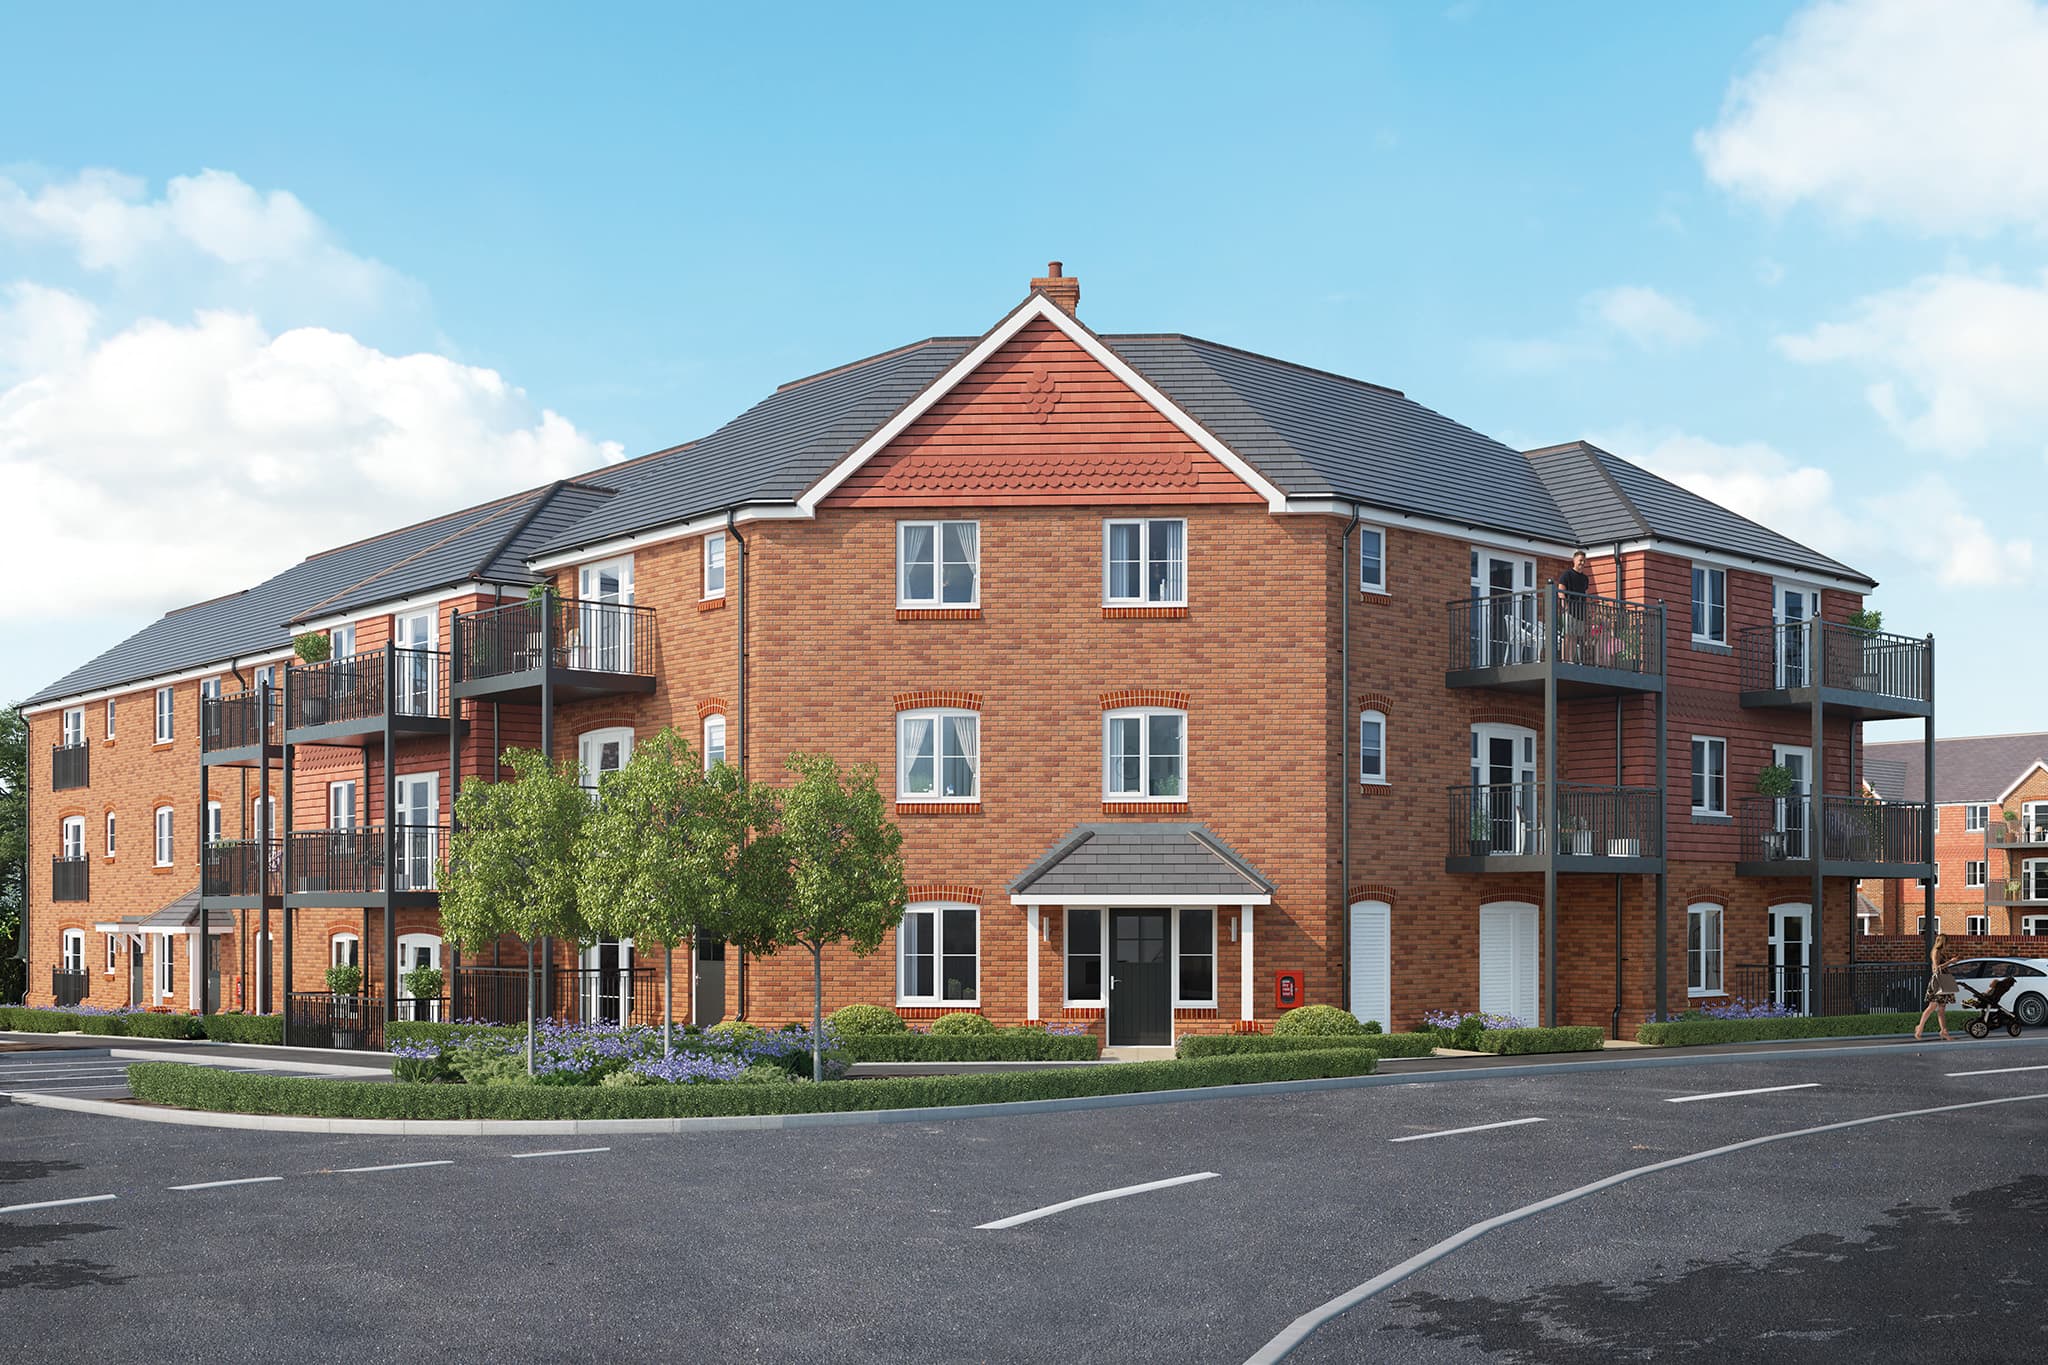 First Homes to Be Released for Sale at Development in Crawley